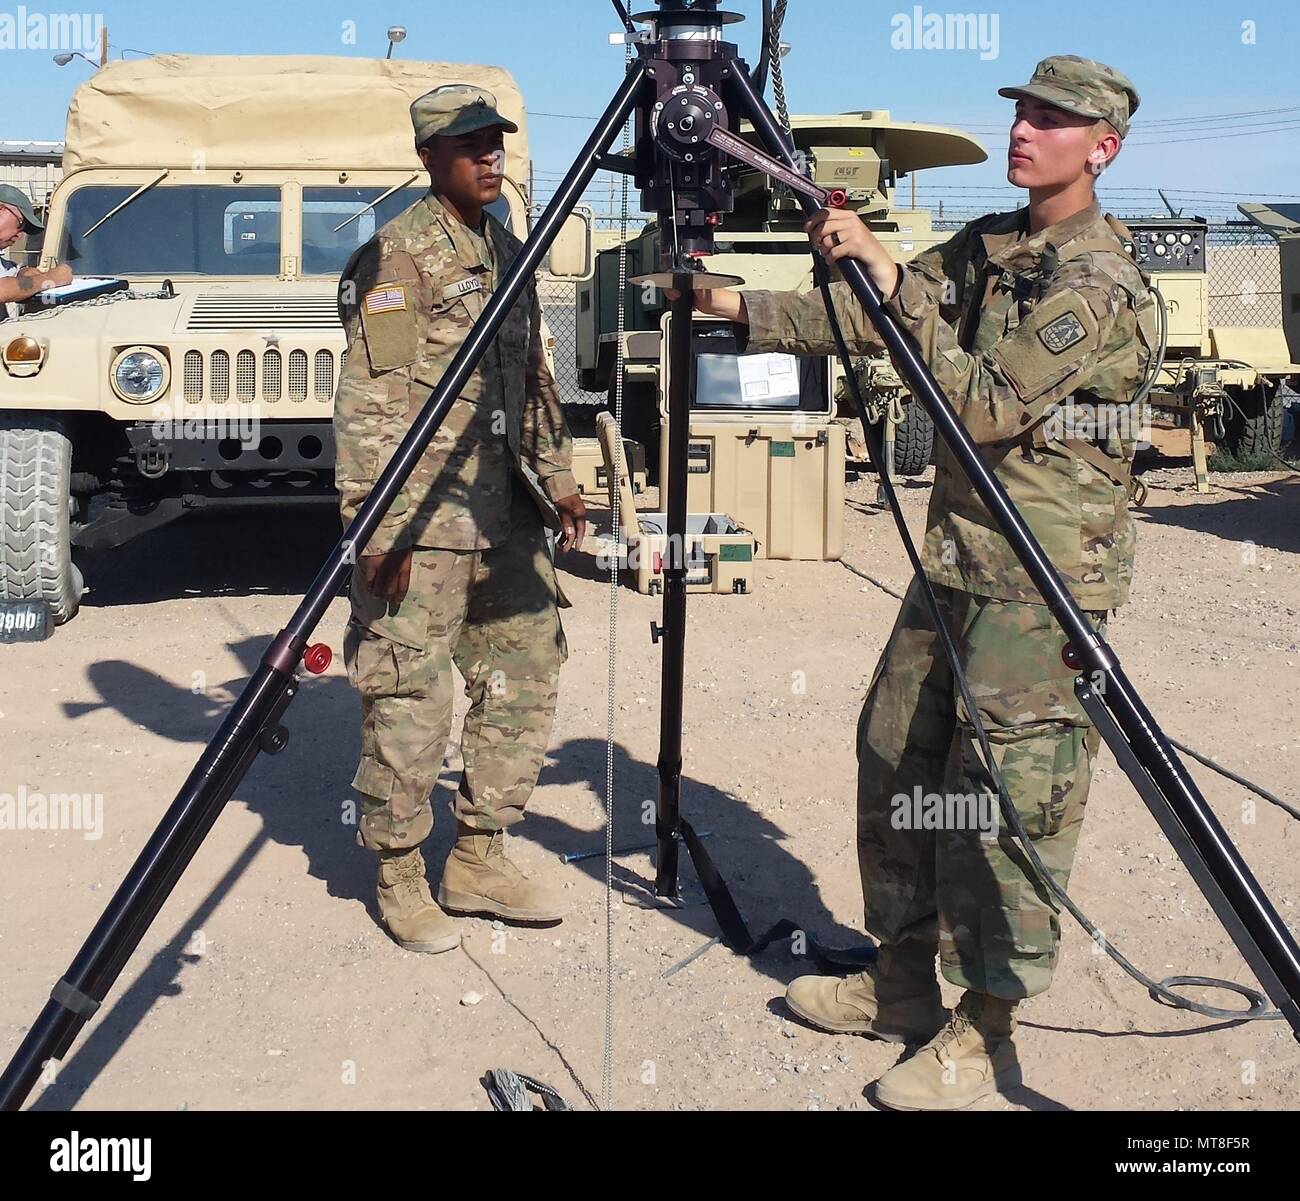 Shortly after returning from Iraq to Fort Hood, the Army's 57th  Expeditionary Signal Battalion supported the operational test of a  line-of-sight radio during NIE 17.2, conducted in July at Fort Bliss, Texas.